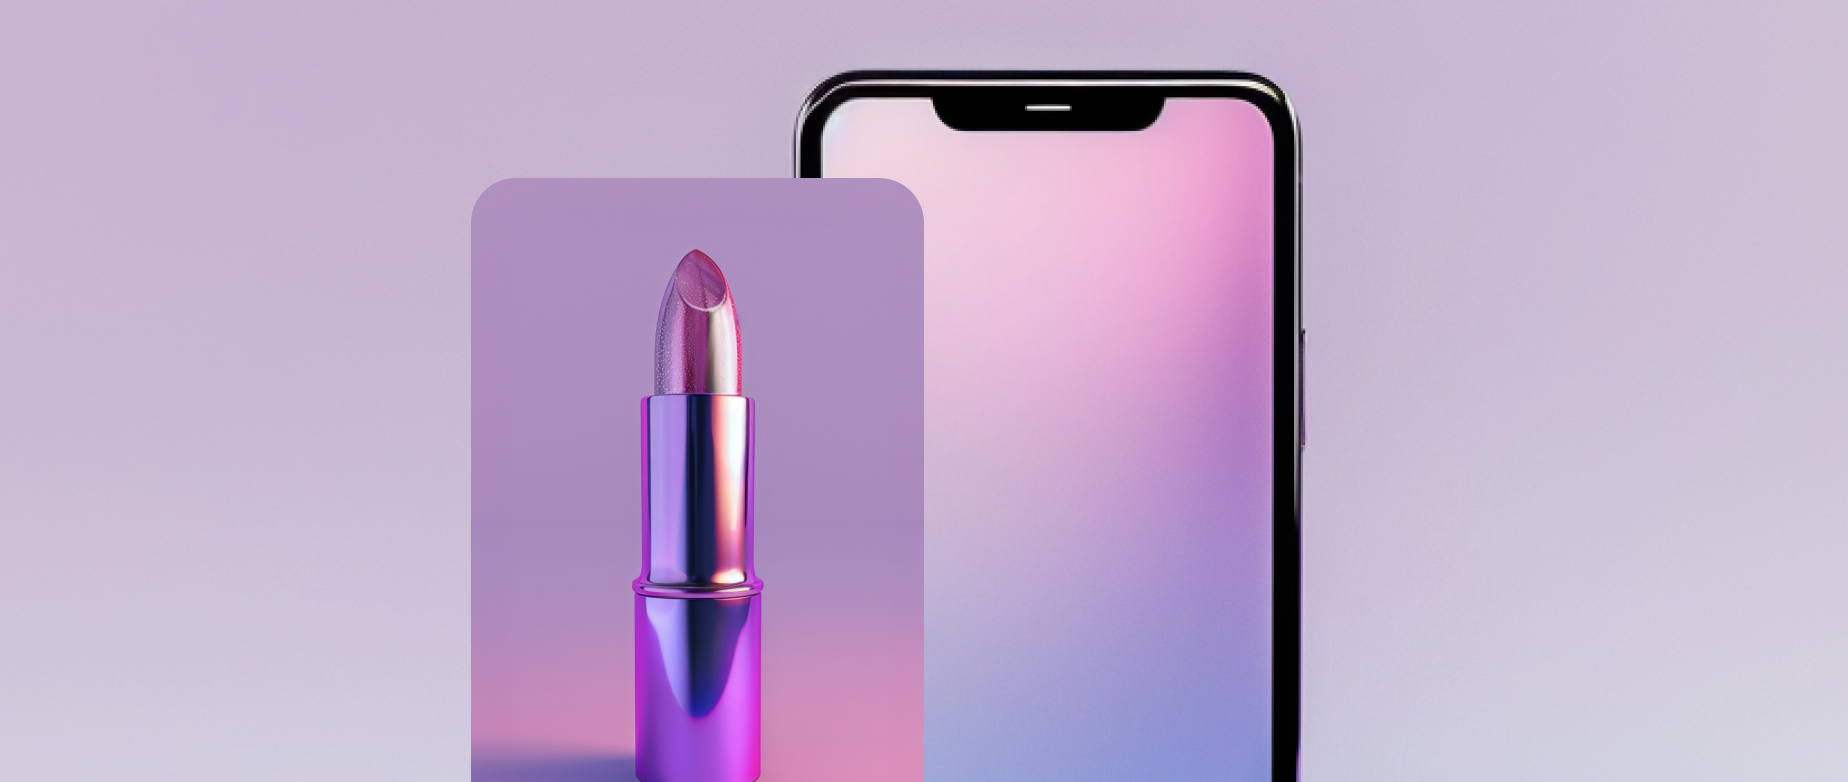 A phone screen with a panel displaying lipstick on a light purple background.